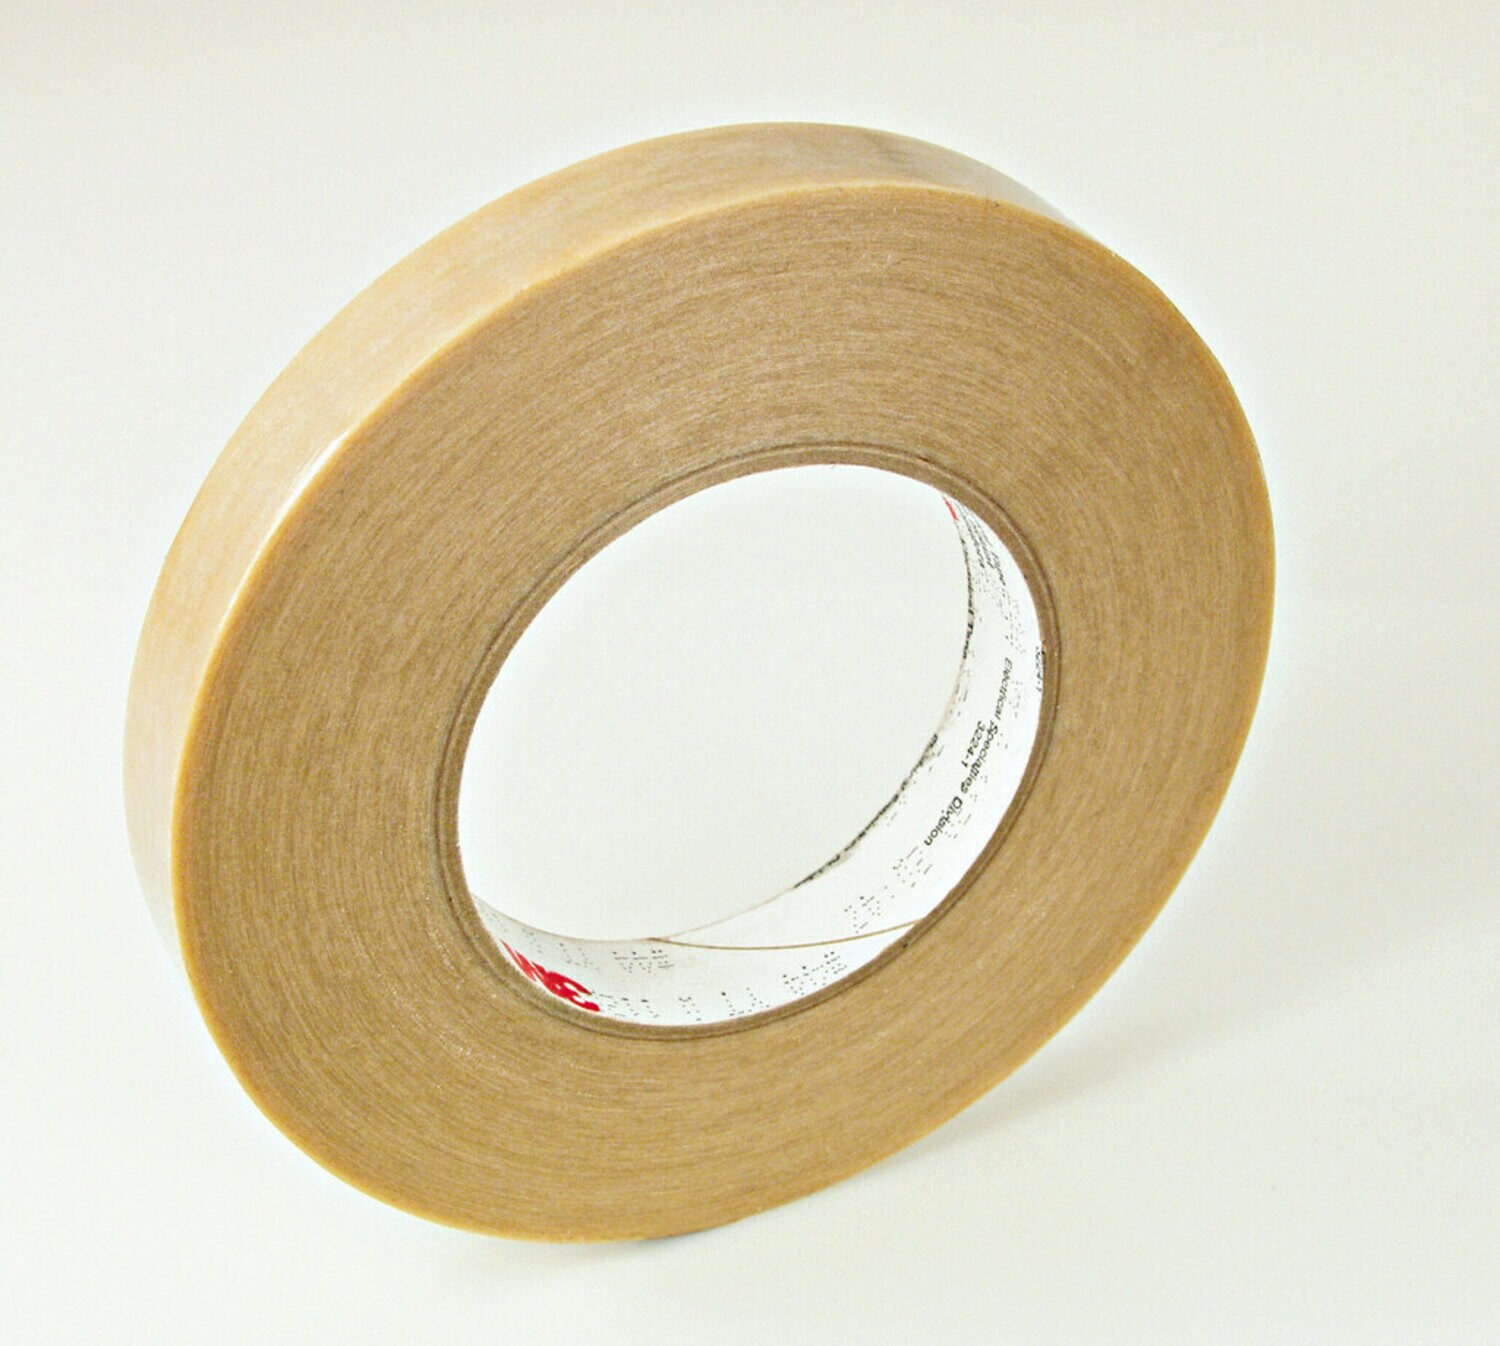 7010398873 - 3M Composite Film Electrical Tape 44, 23-1/2 in x 360 yd, 3 in Paper
Core, Log Roll Untrimmed, 1 Roll/Case